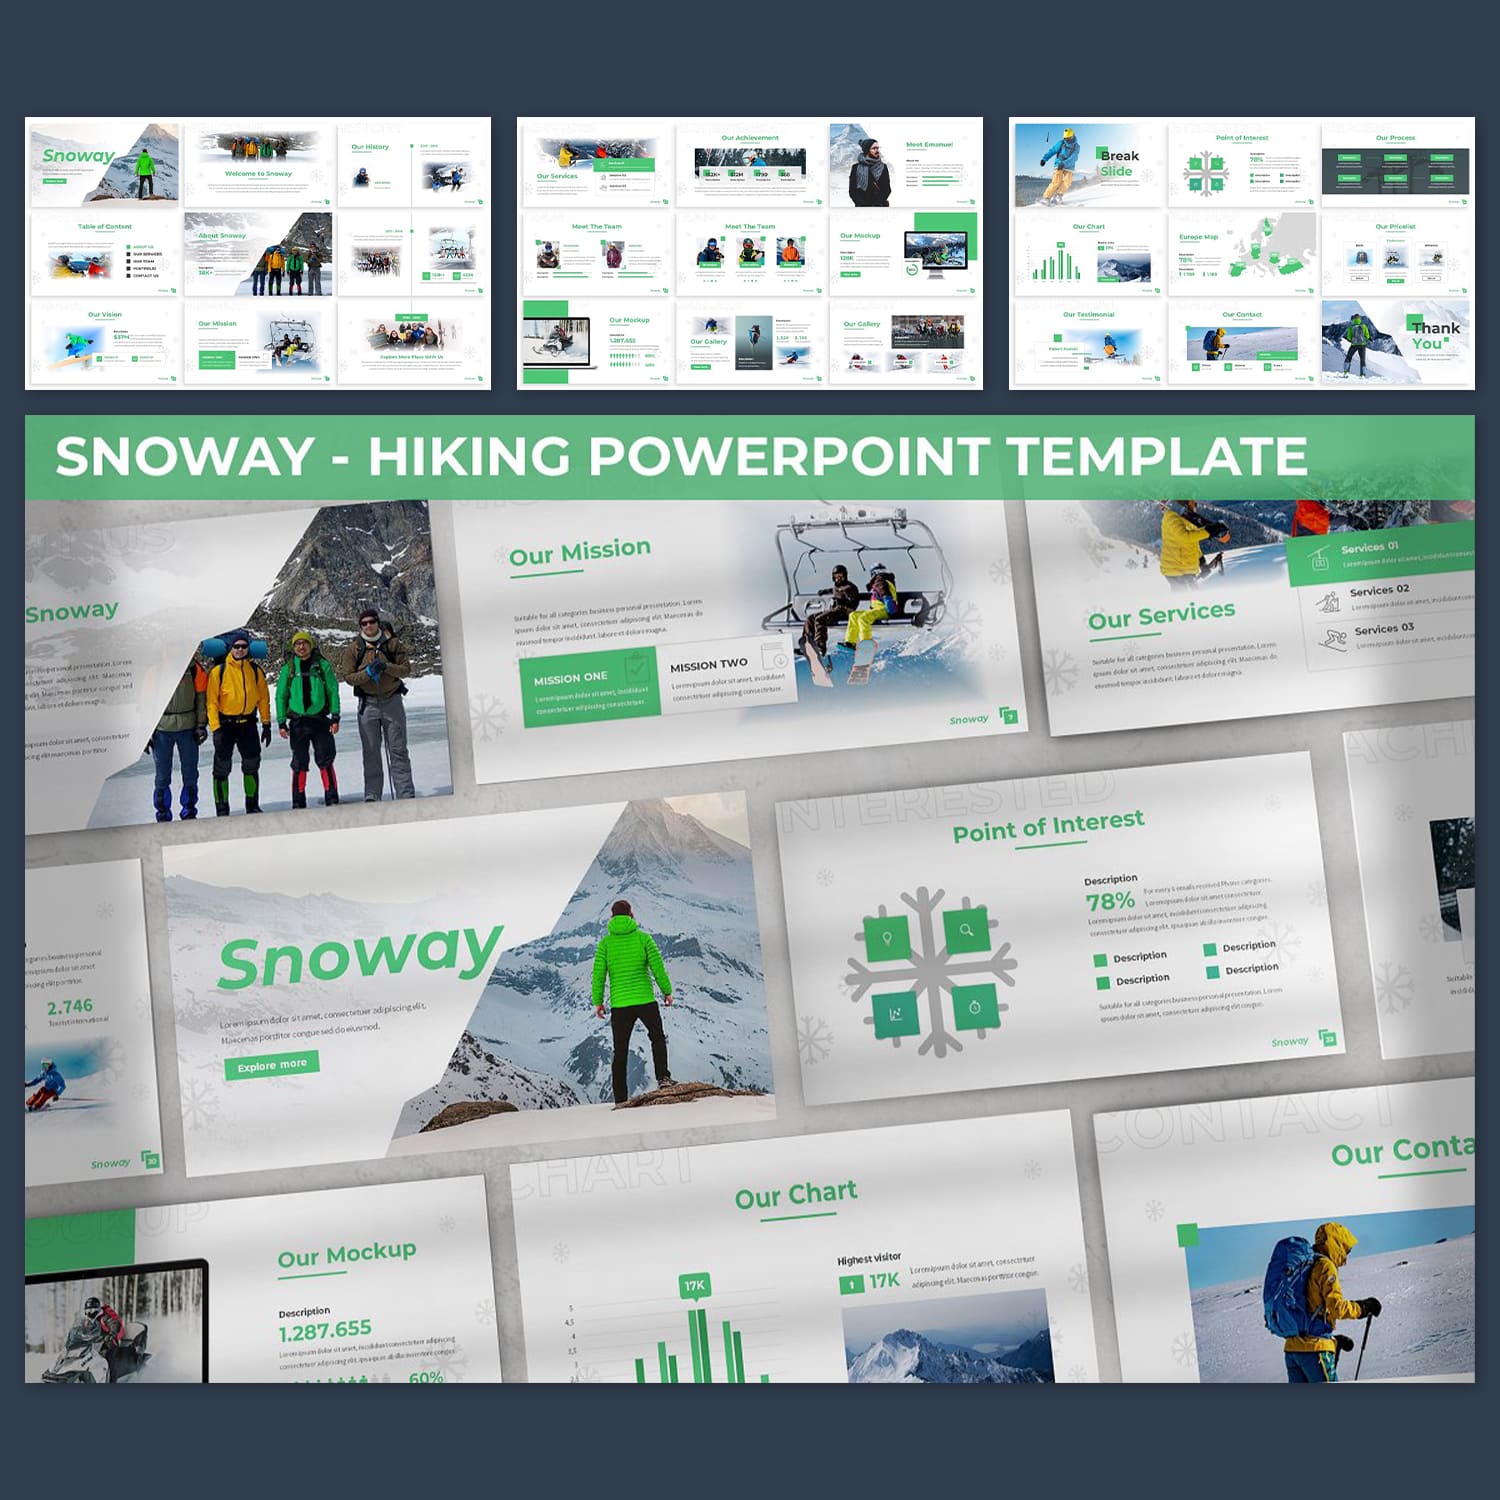 Snoway - Hiking Powerpoint Template main cover.